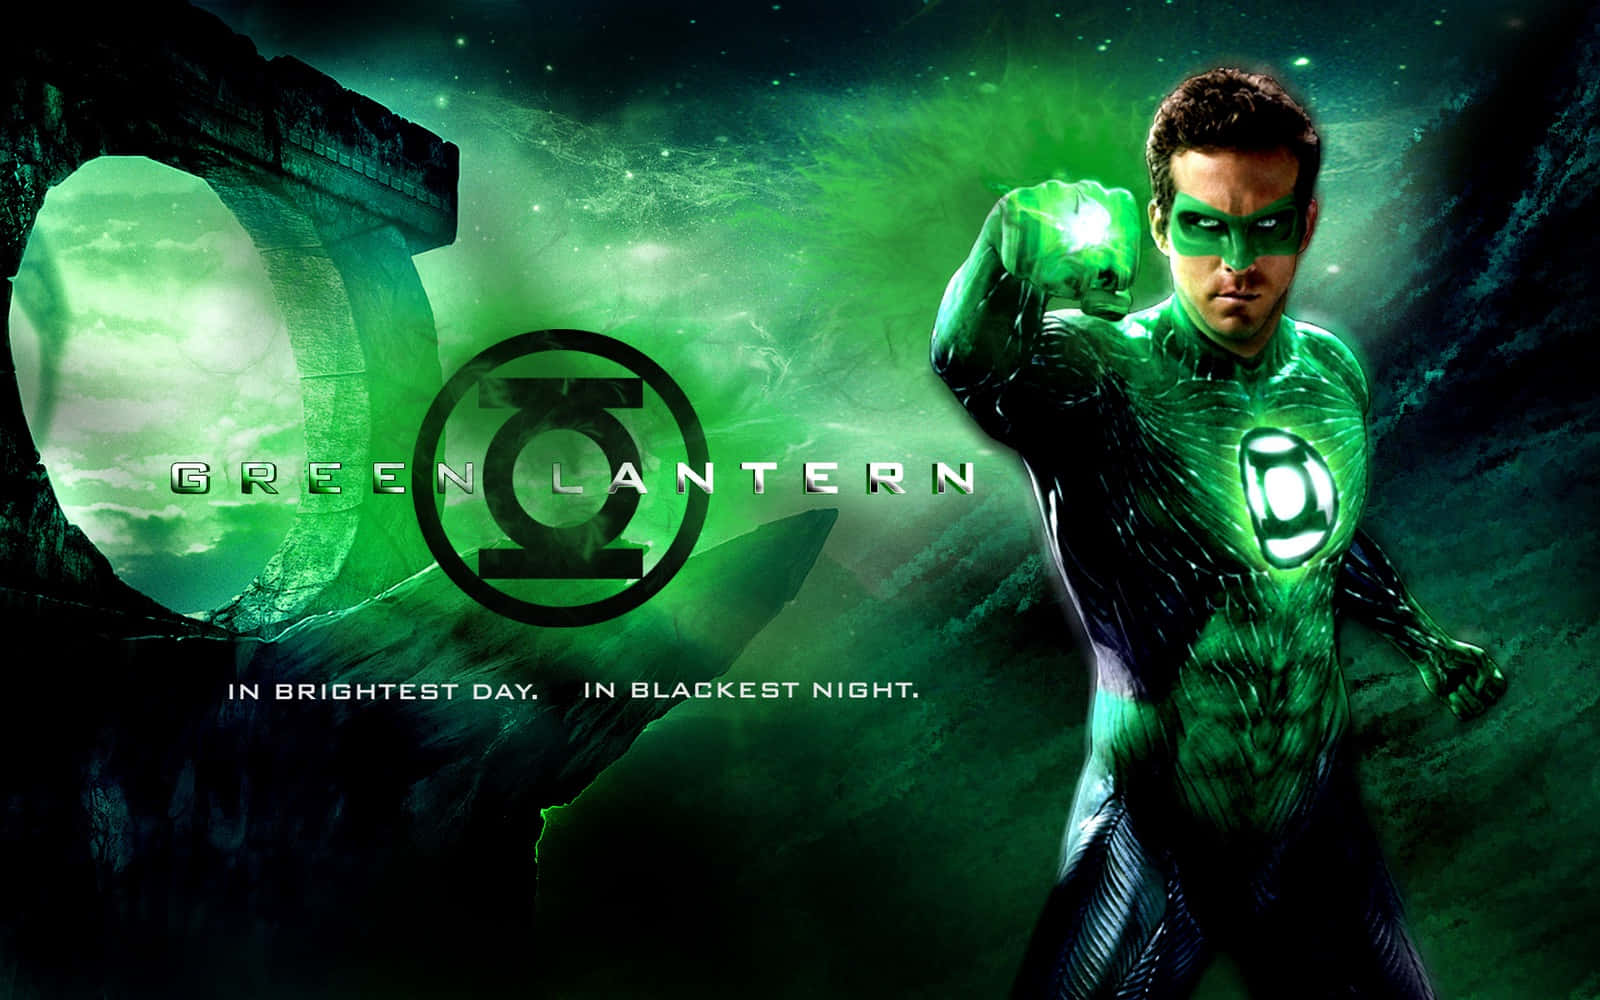 The Green Lantern Symbolizes Power, Protection and Hope